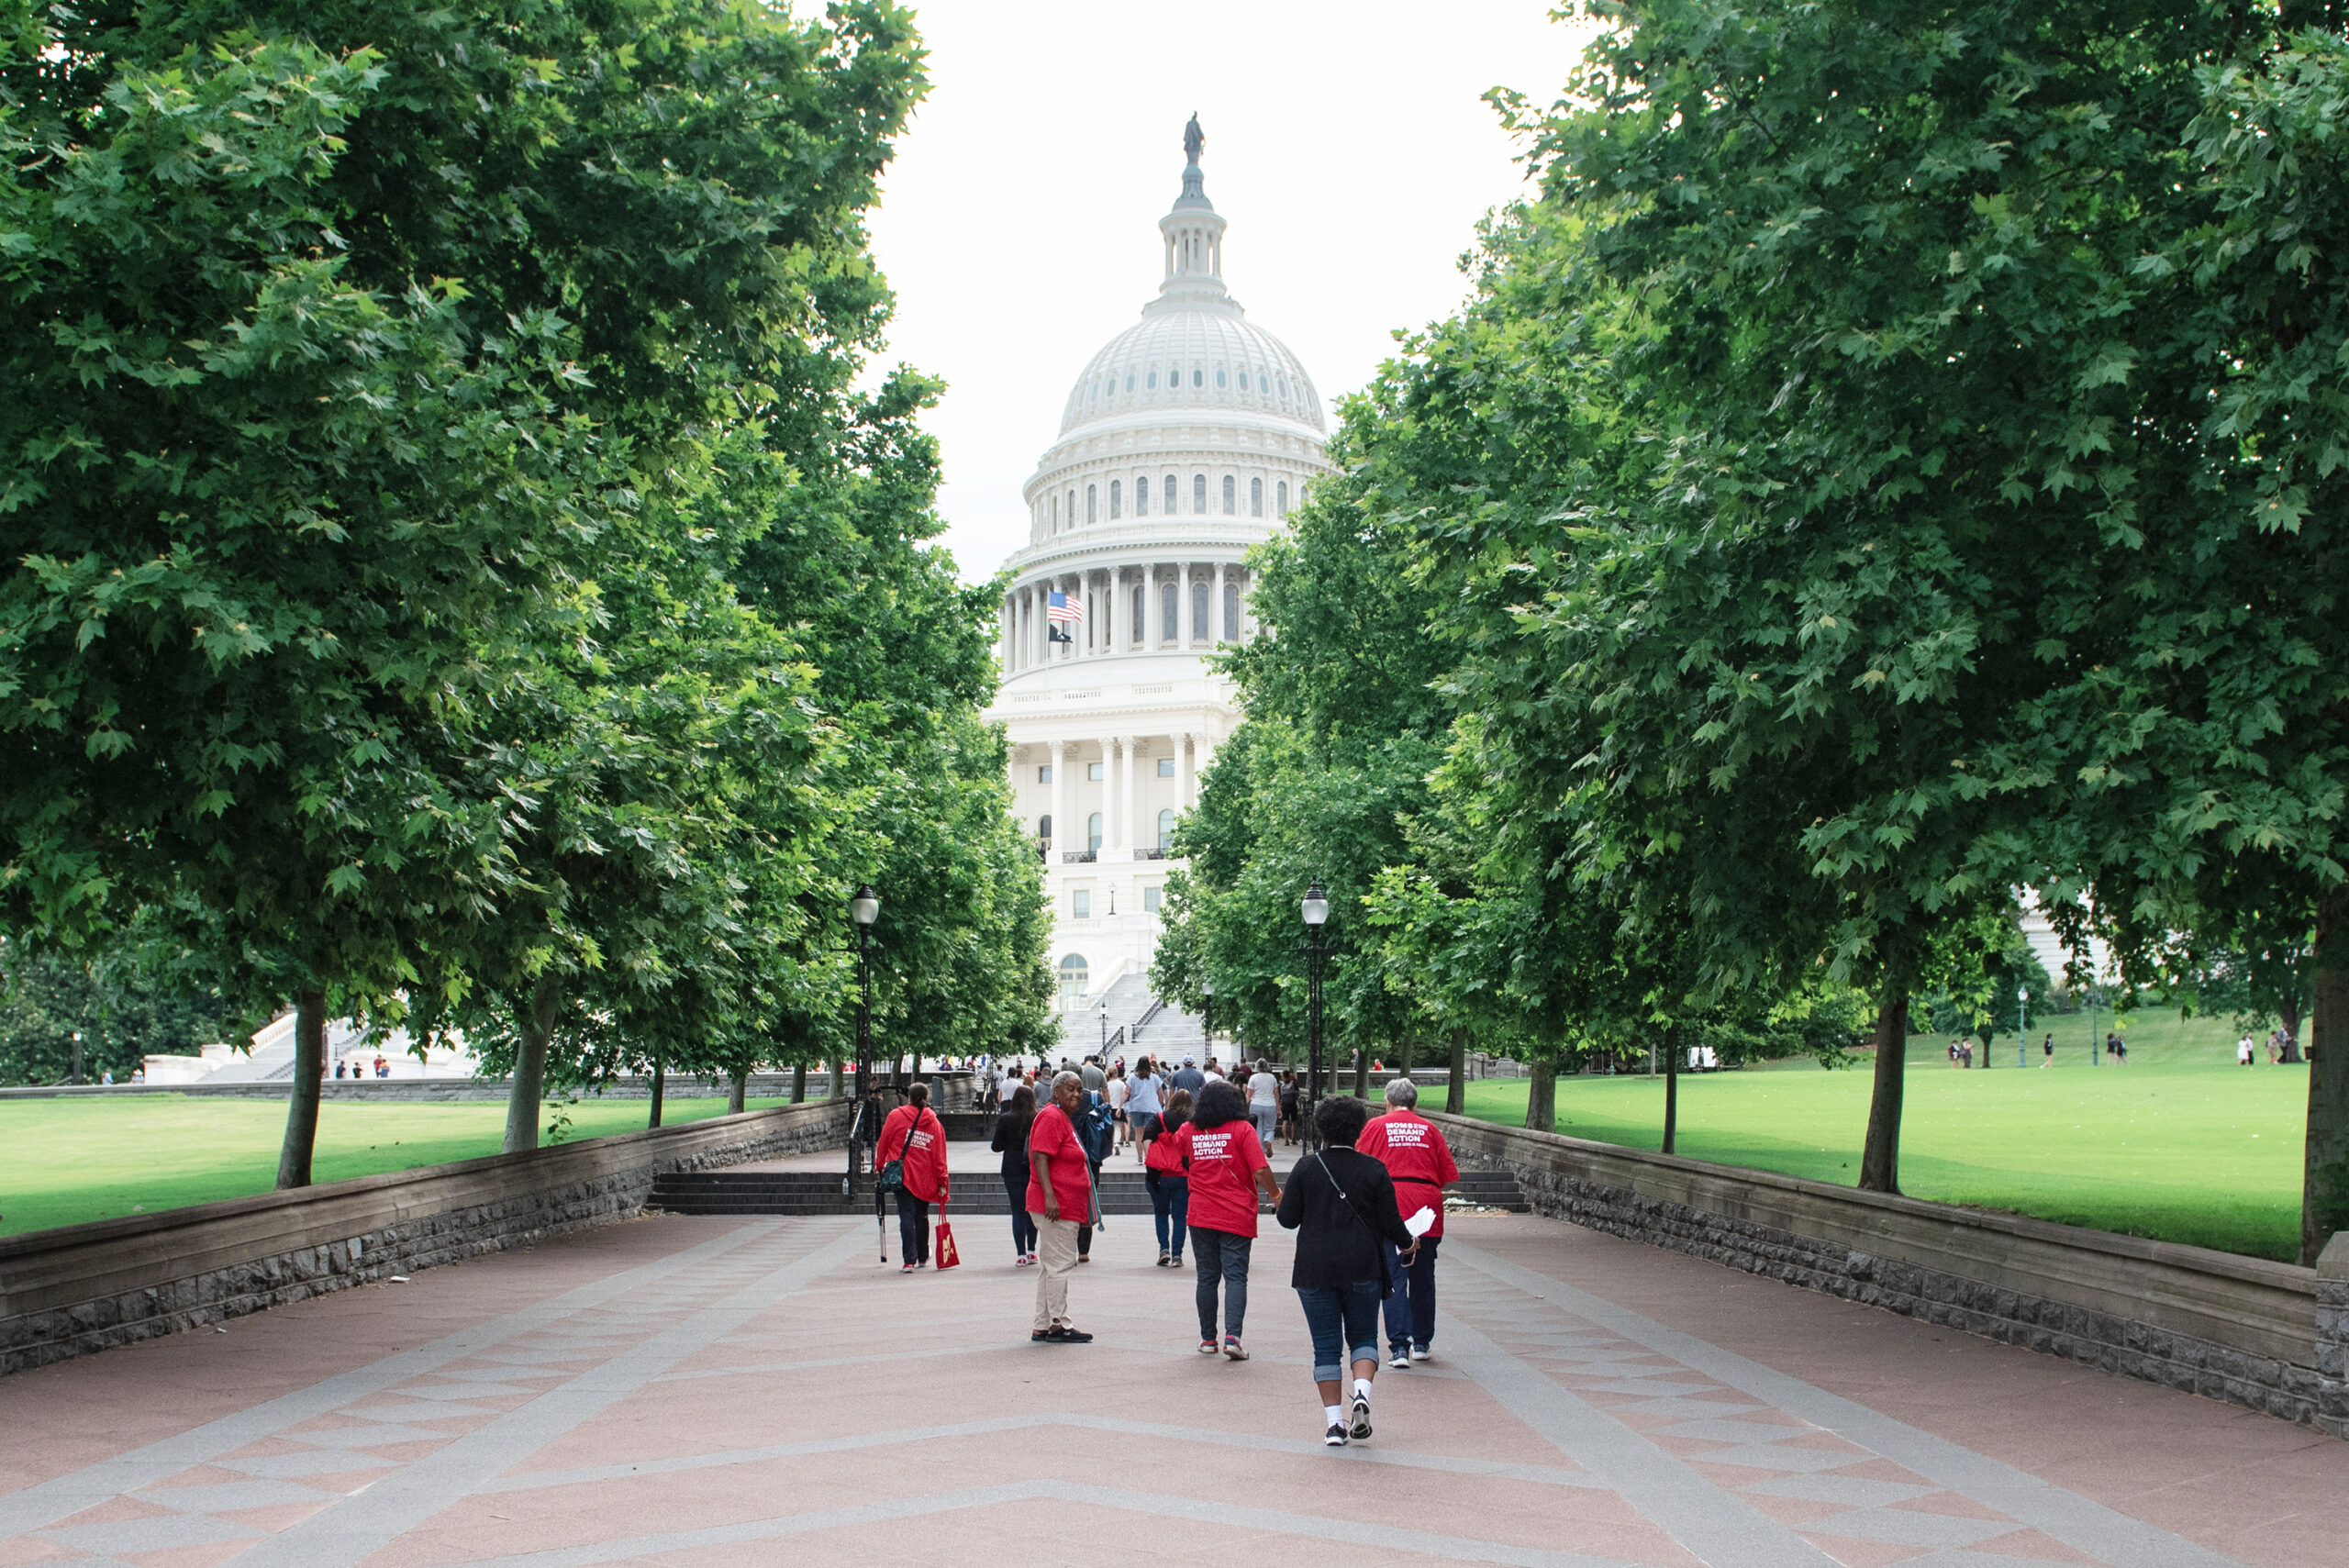 A group of Moms Demand Action volunteers are photographed from the back as they walk up the path to the Capitol Building. Shade trees line the path; the Capitol Building is visible in the center of the path, between the rows of trees. 